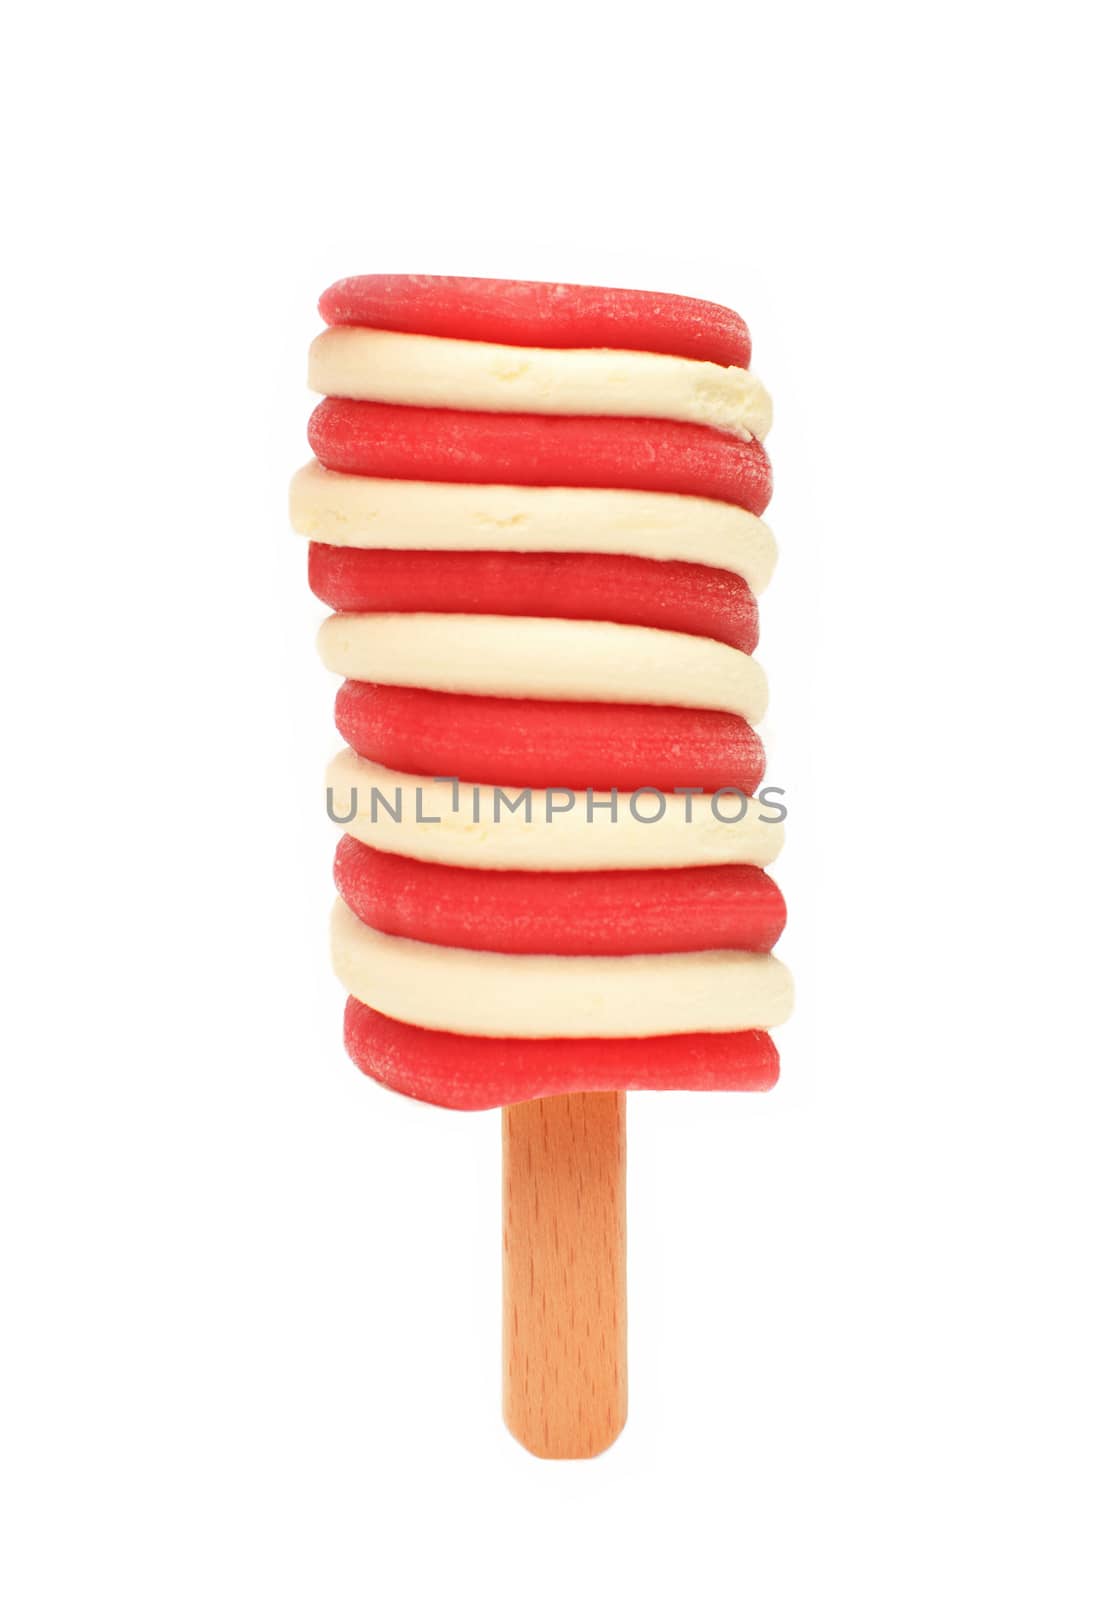 Strawberry flavoured ice popsicle over a white background